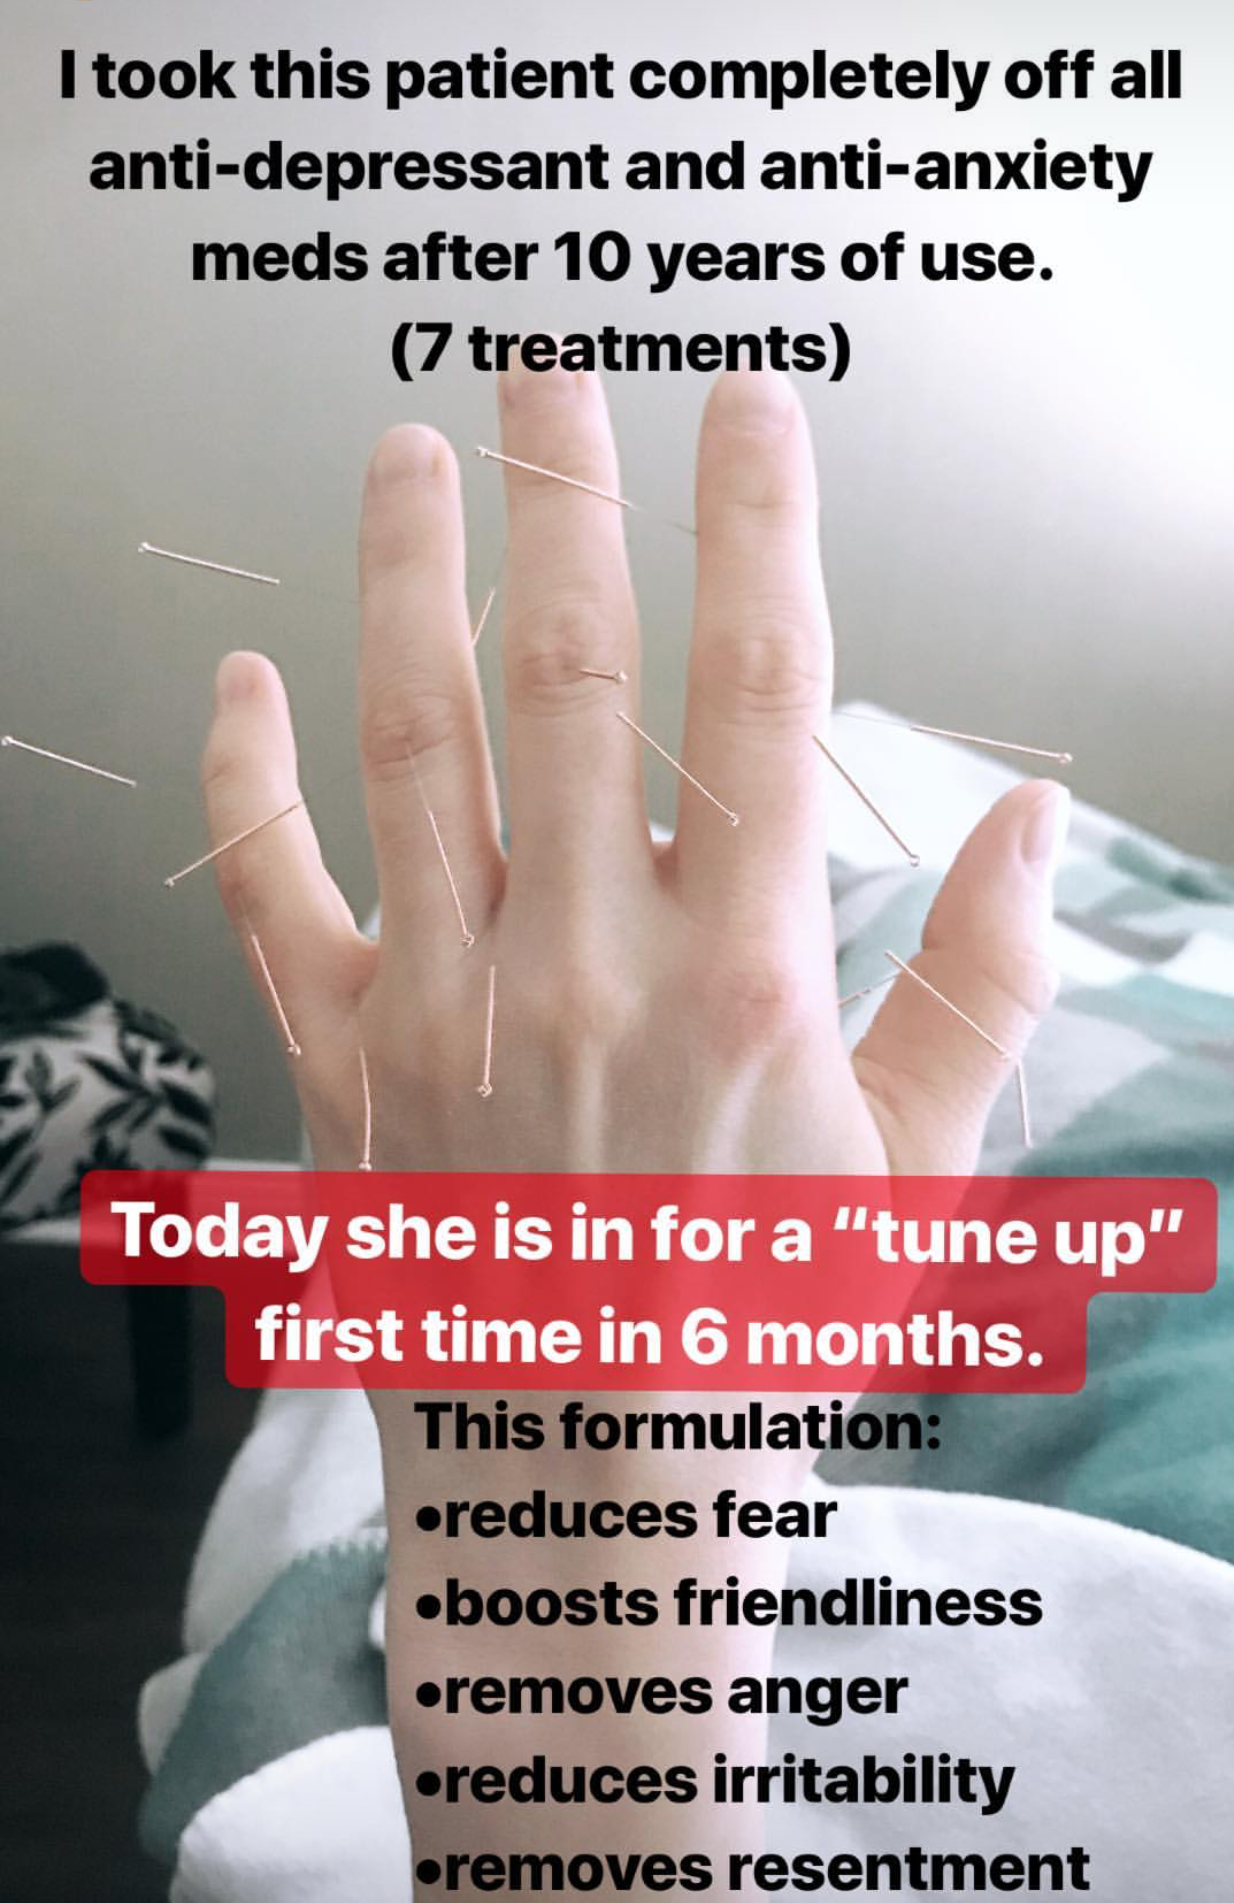  SuJok acupuncture in Vancouver used for treating mental health. Patient received treatment for being on antidepressants for 10 years. Treatment number seven served as a “tune up” for boosting friendliness, removing anger and resentment, etc.  